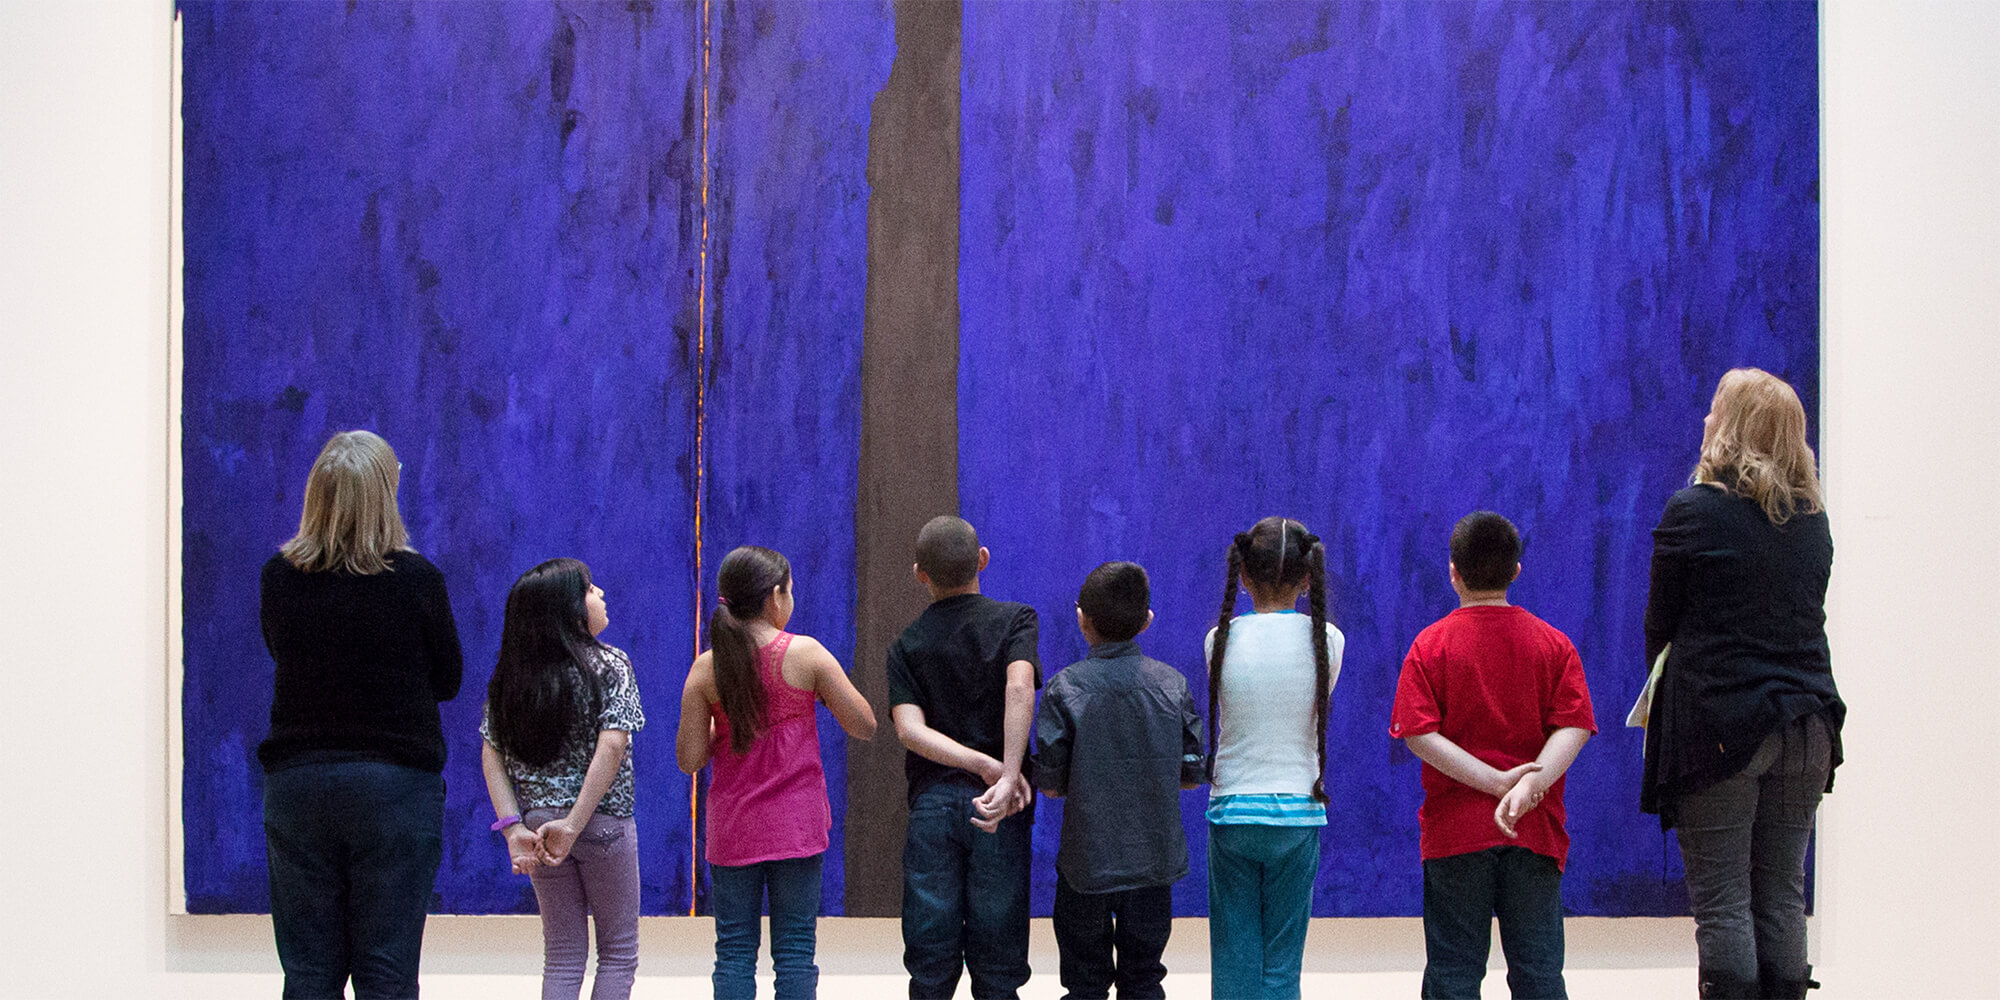 Children and teachers look up at a large blue painting